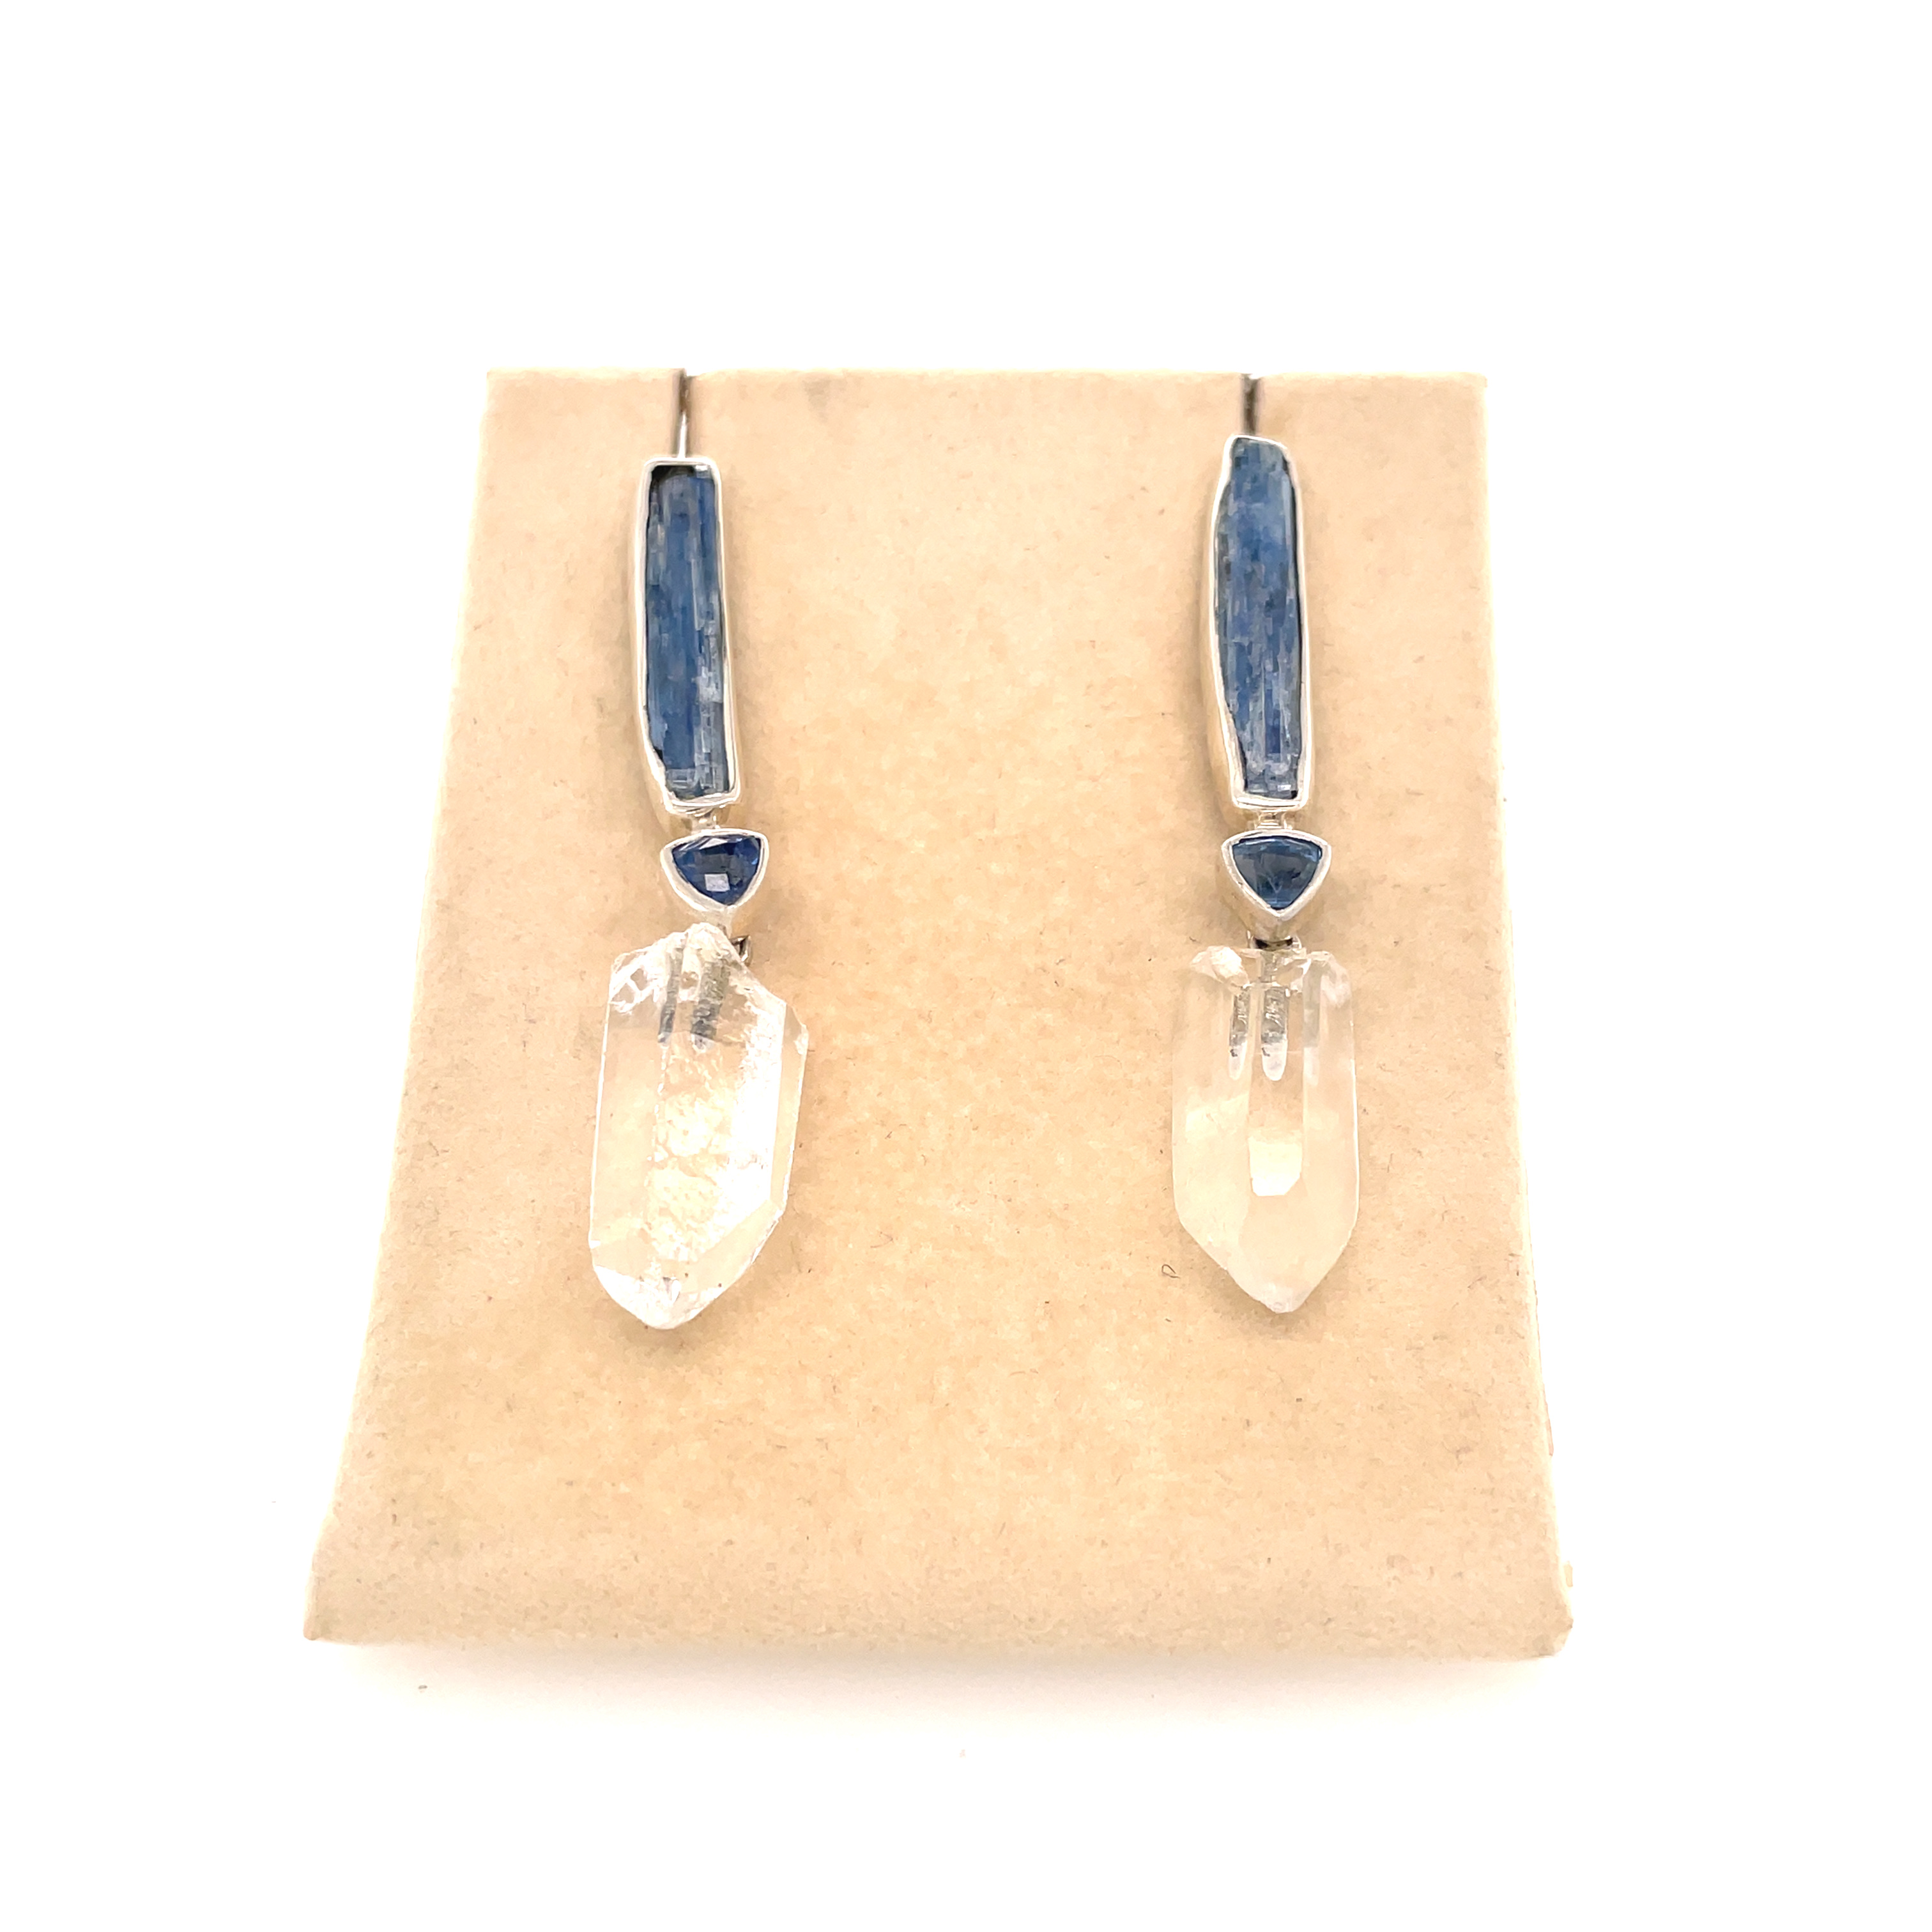 MAB 21-0188 Raw Kyanite, Faceted Kyanite and Faceted Crystal Earrings with Removable Dangles